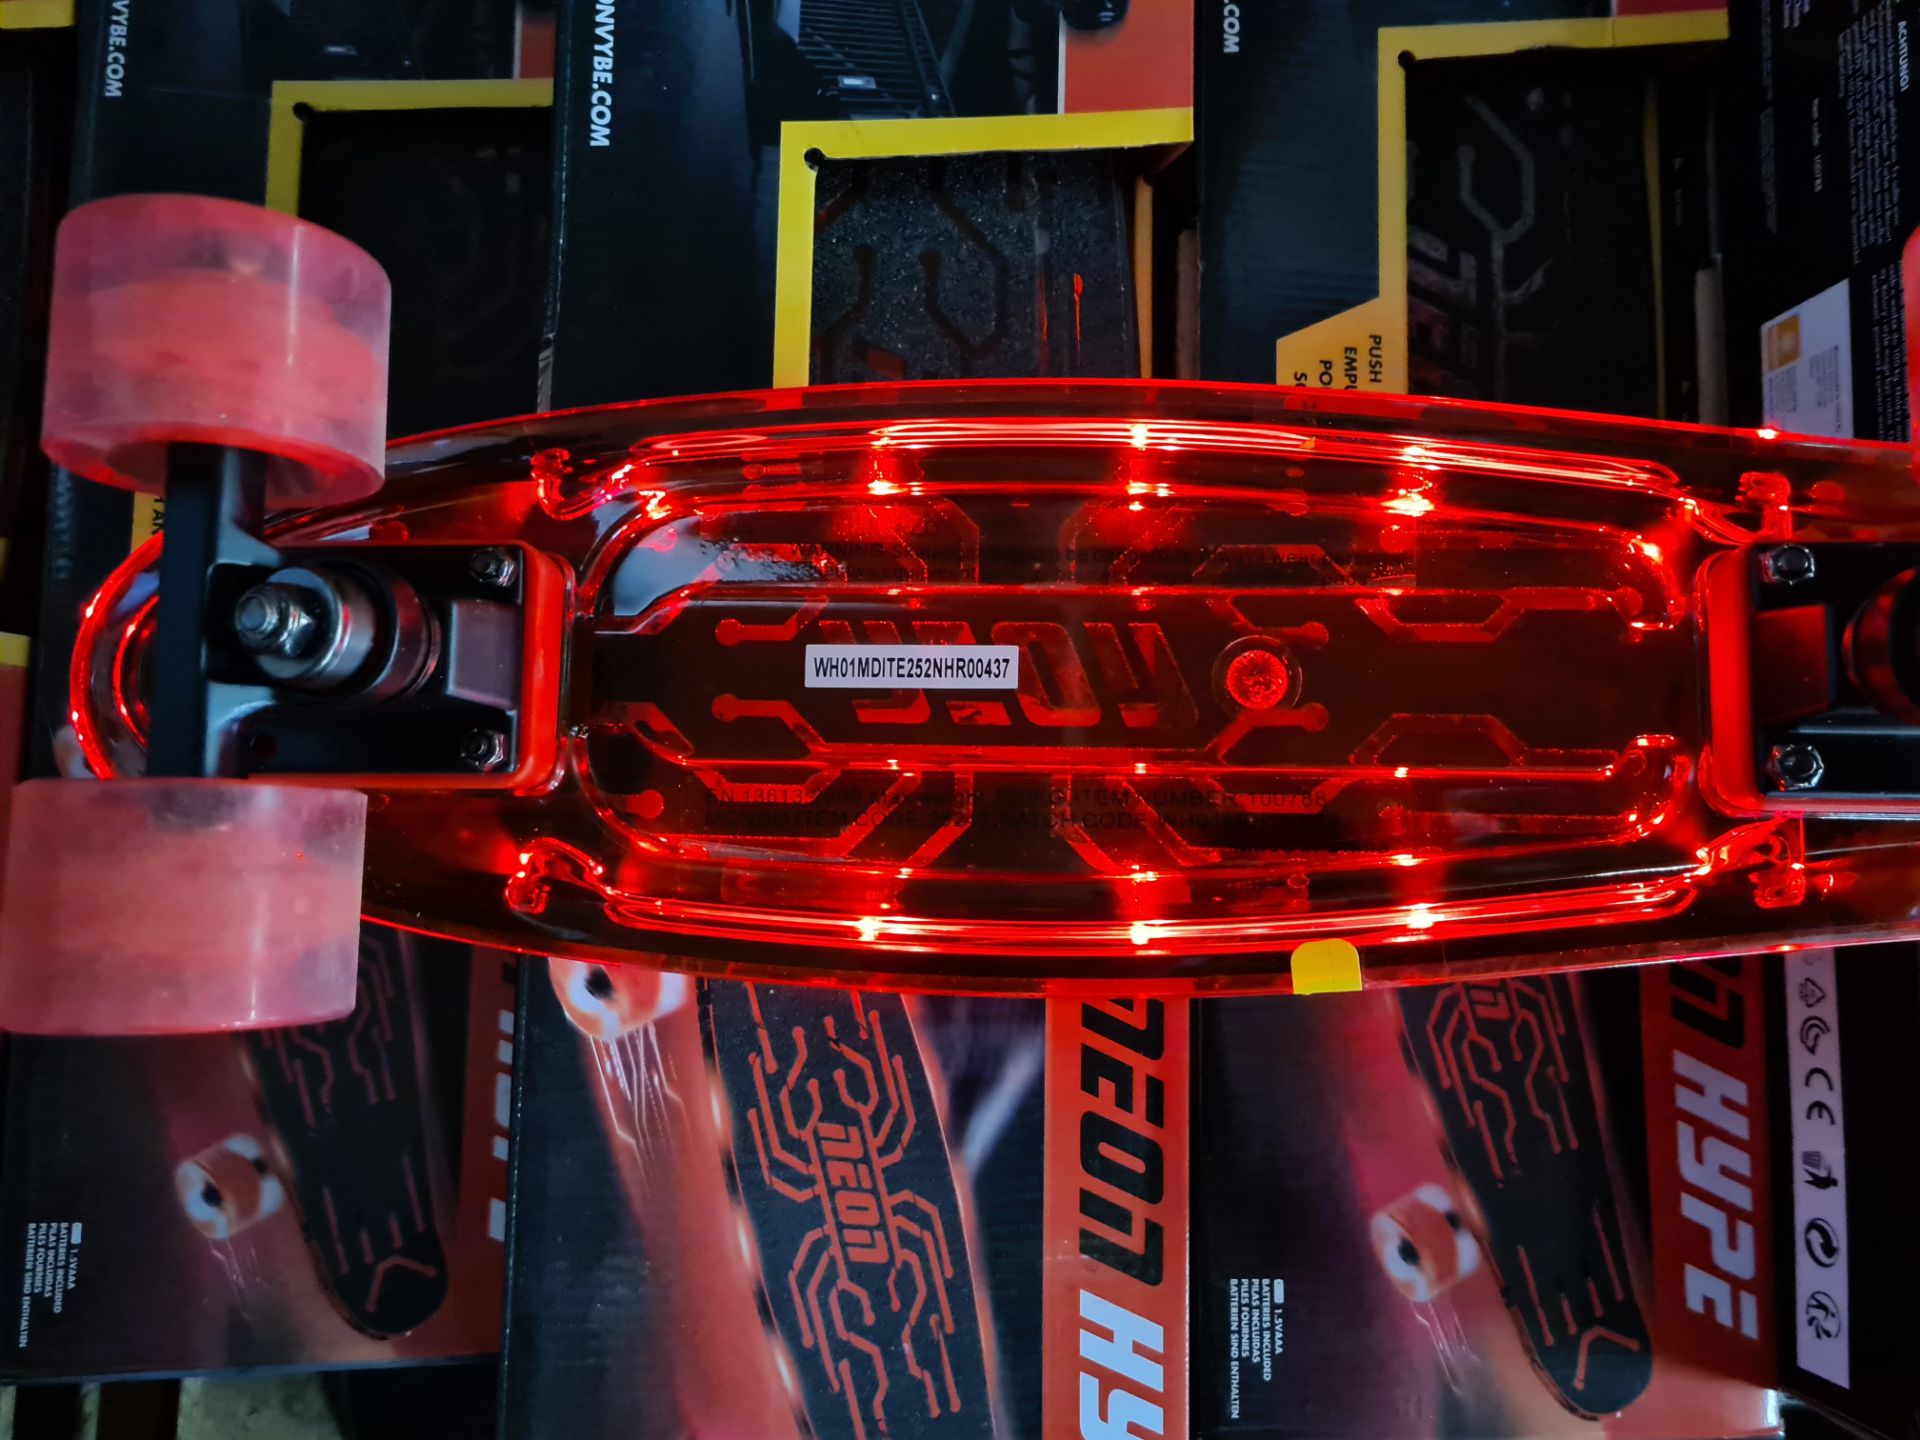 Neon Hype Skateboard with LED Light-up Function | RRP £39.99 - Image 2 of 3